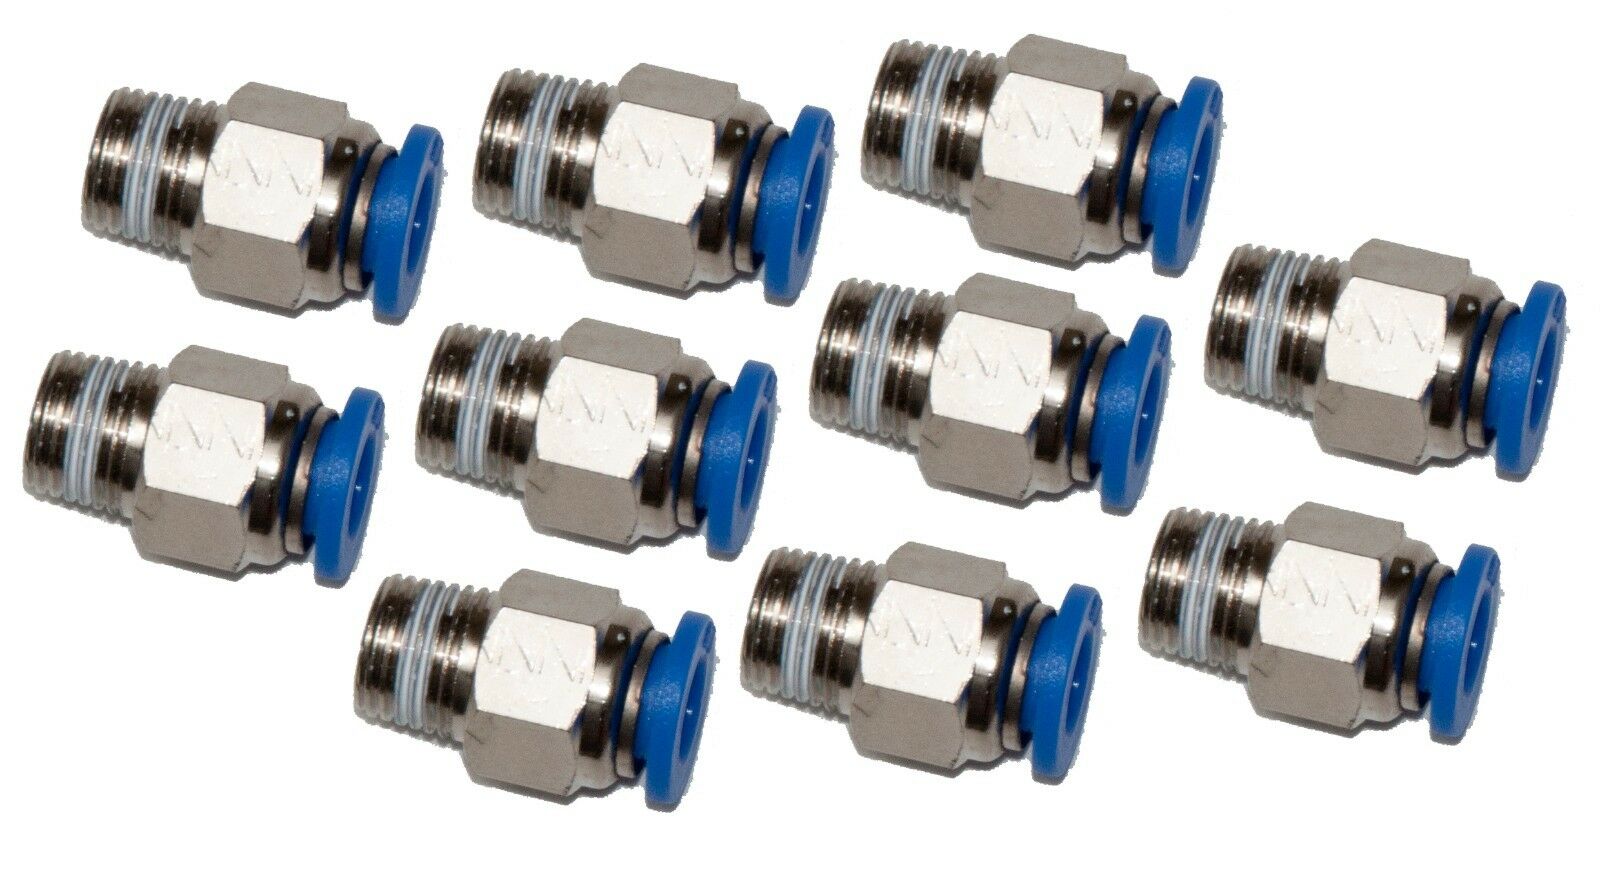 10  Pneumatic 1/4" Tube X 1/8" Npt Male Connector Push In To Air Connect Fitting